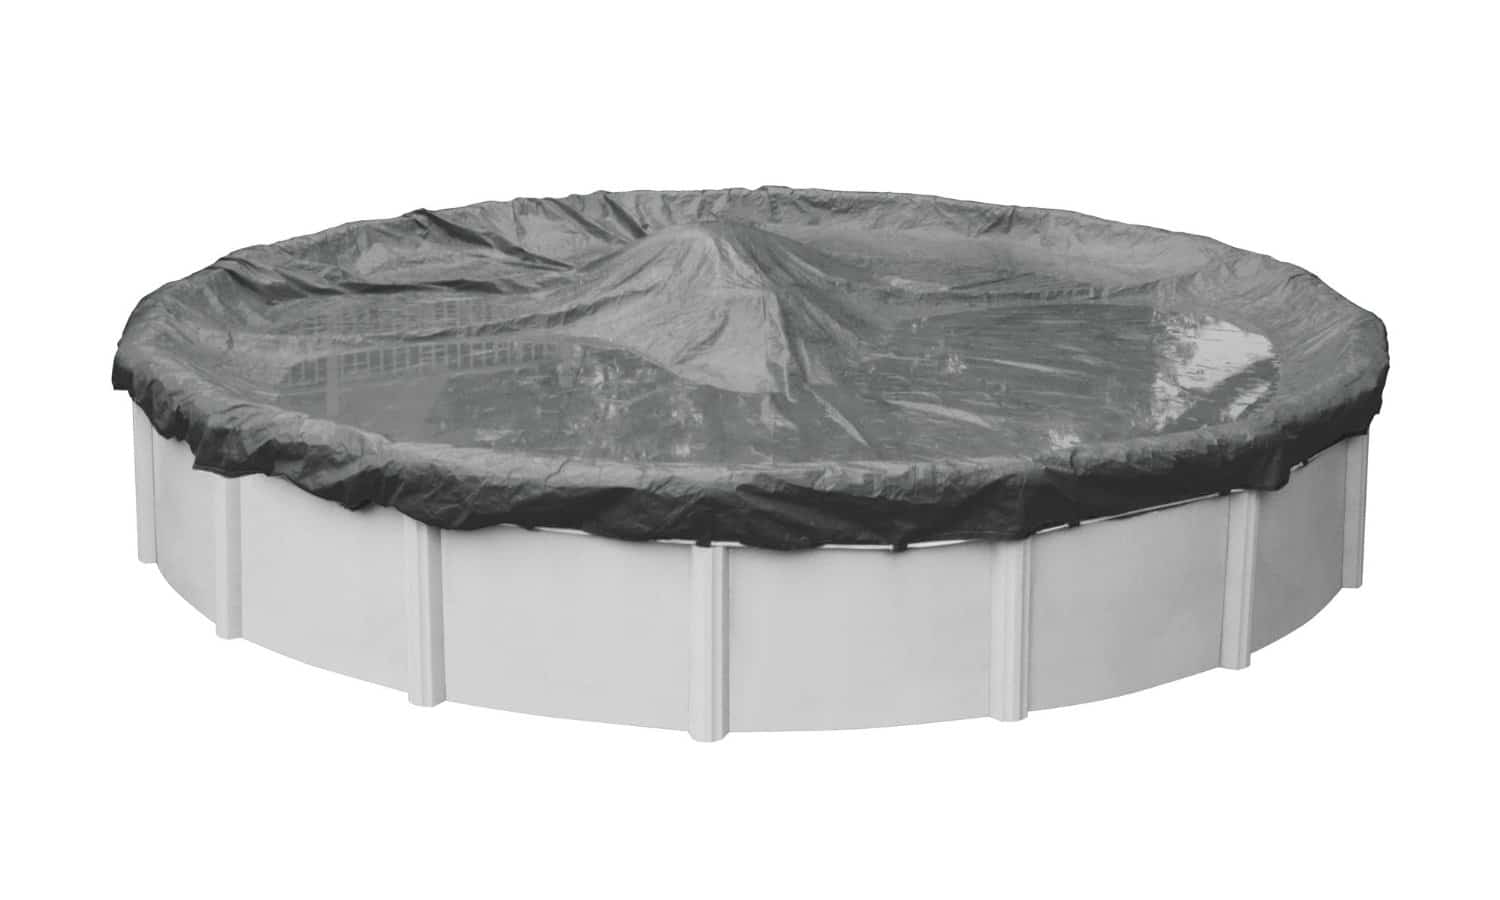 Best Pool Covers For Above Ground Pools 2020